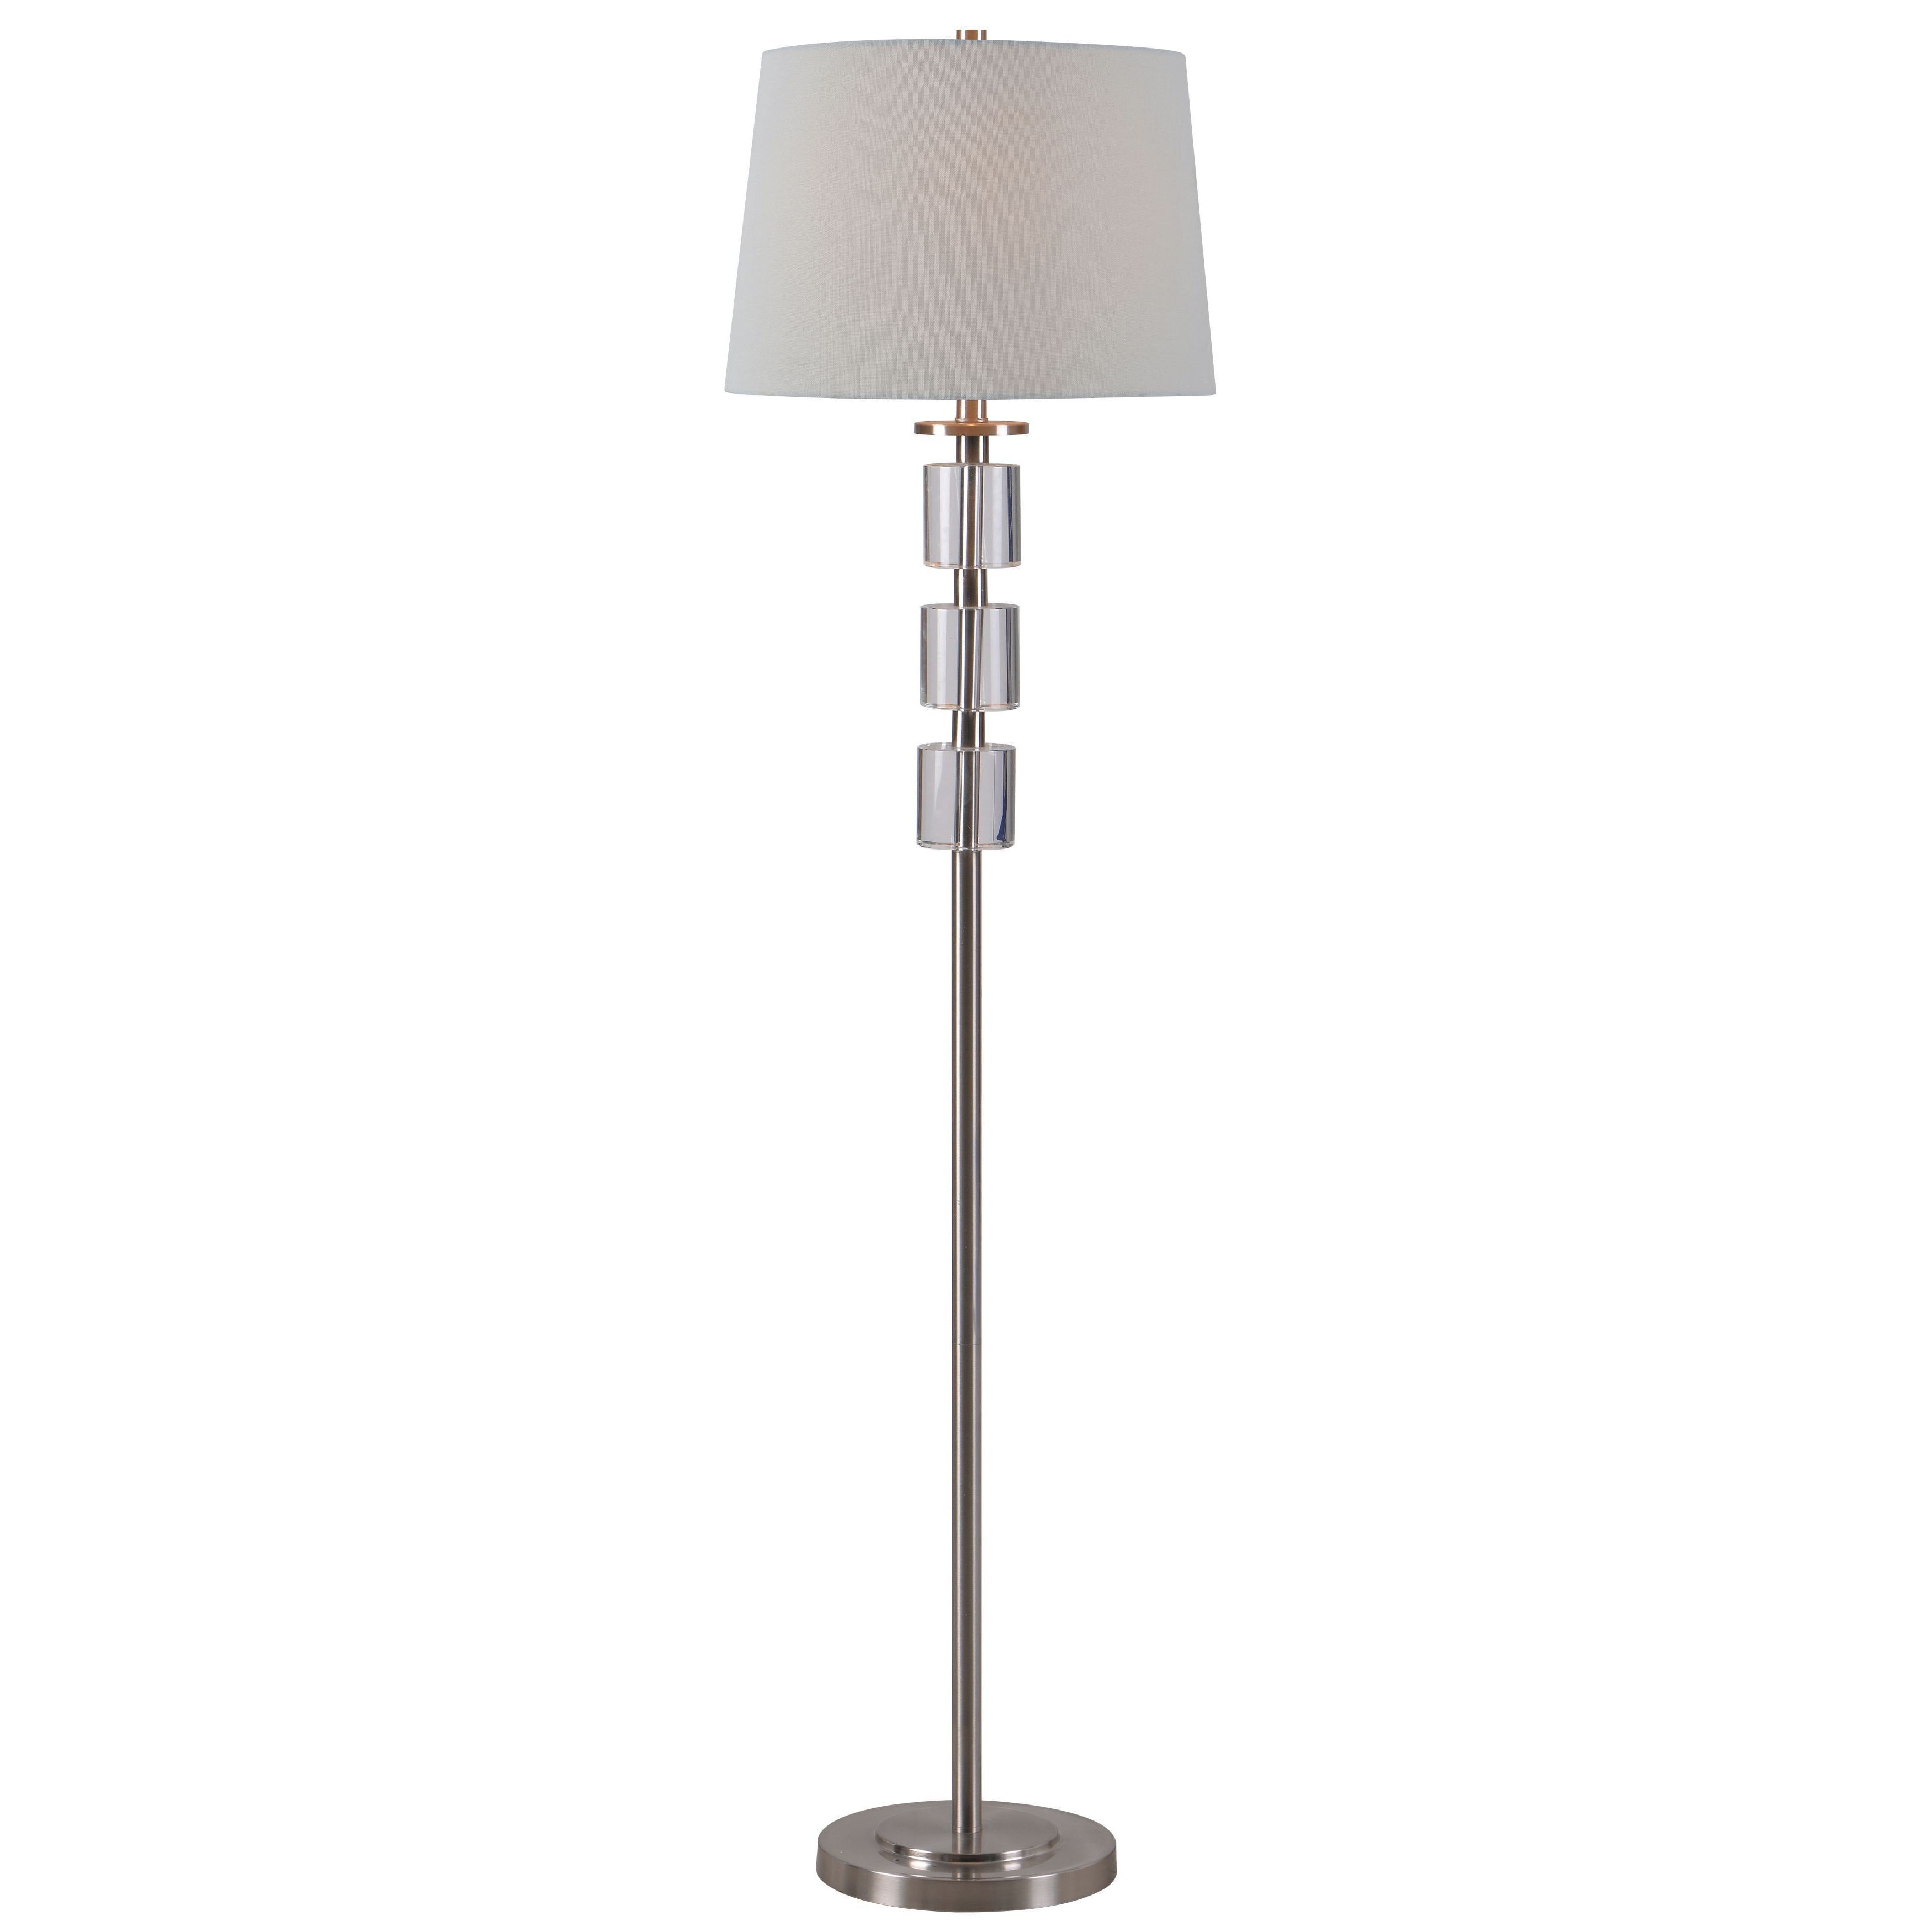 Crystal Floor Lamp Overstock Shopping The Best Deals in proportions 3500 X 3500